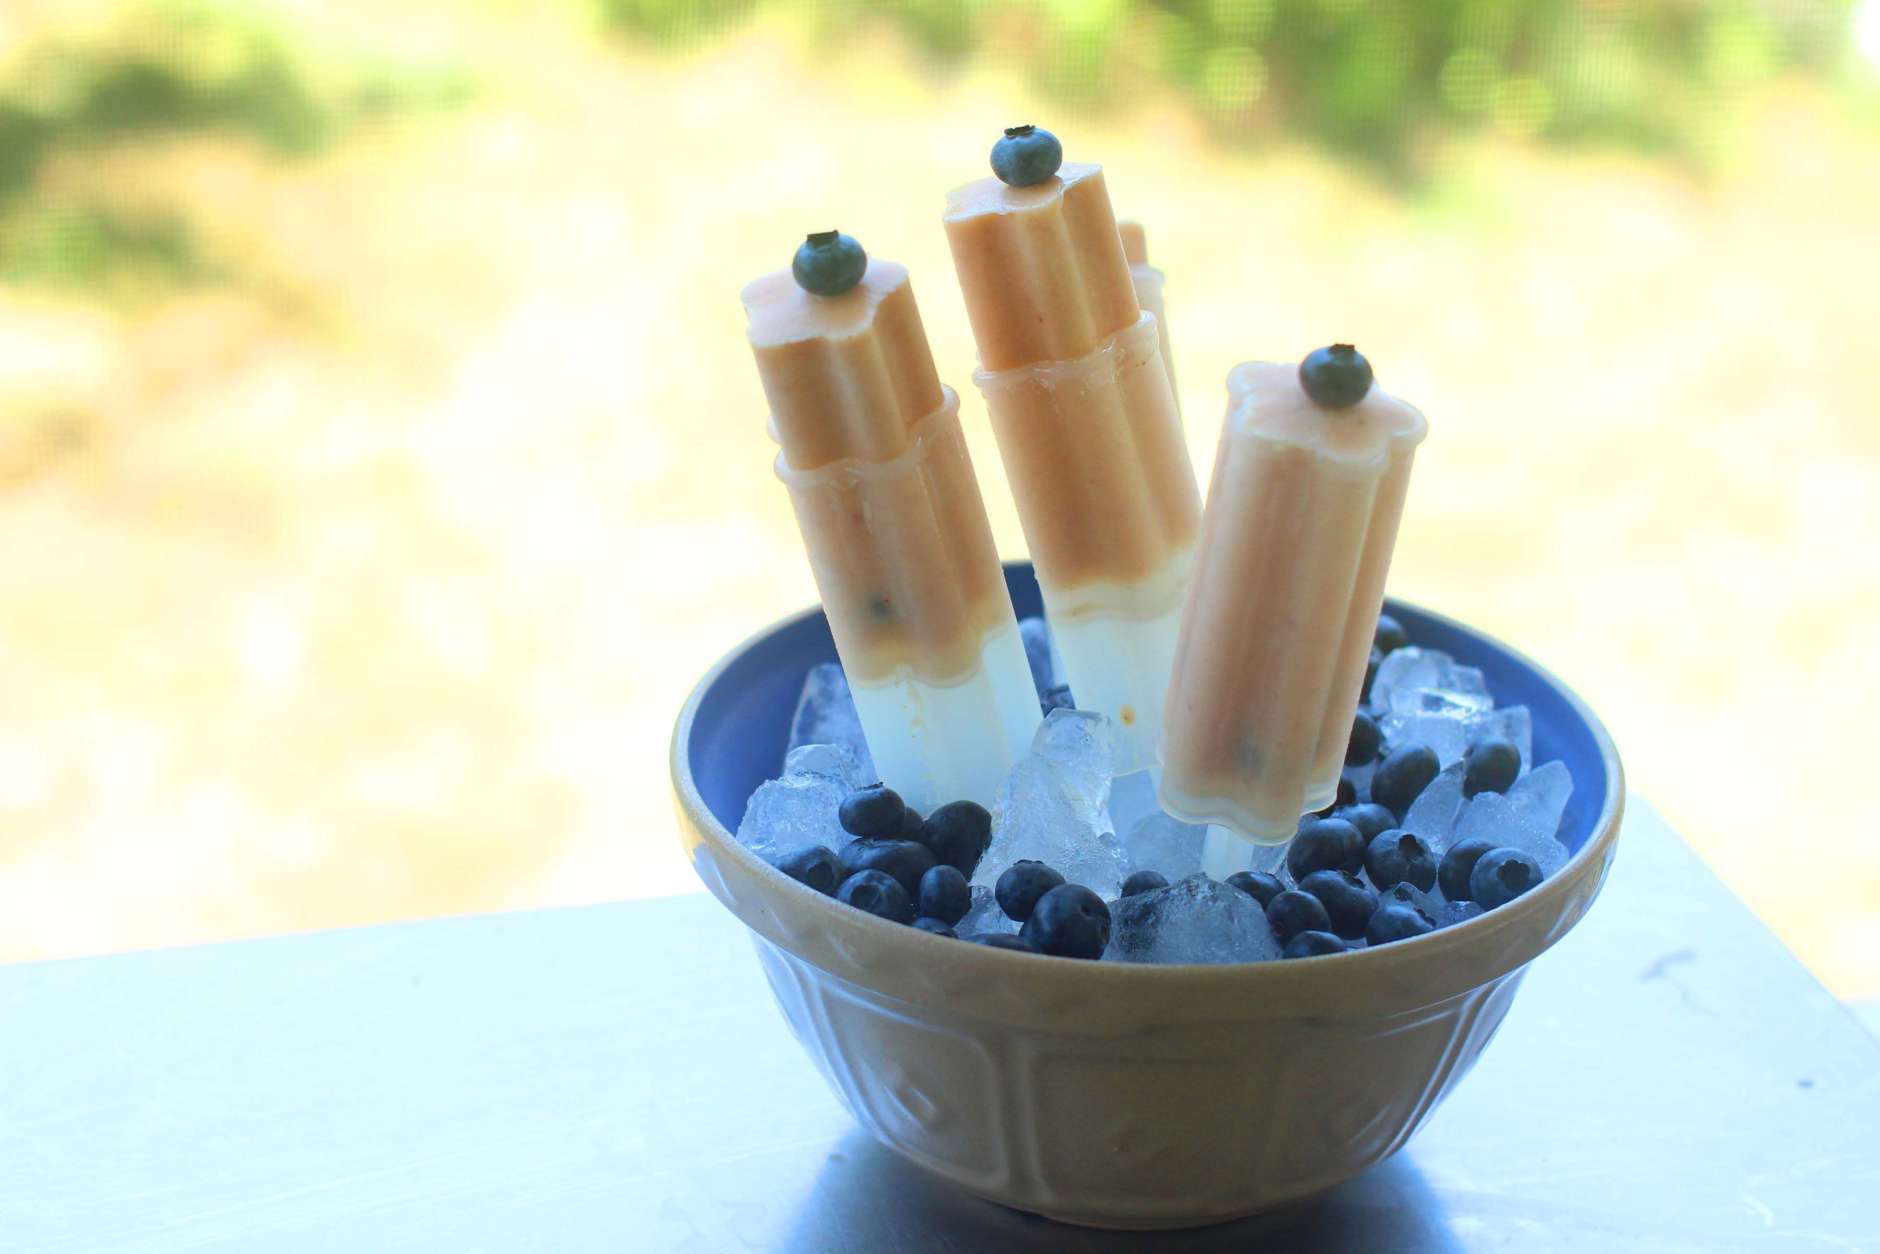 This Aug. 3, 2015 photo shows peach blueberry frozen pops in Concord, NH.This easy recipe for peach-blueberry frozen pops is a great way to use some of your frozen fruit stash any time of year. (AP Photo/Matthew Mead)